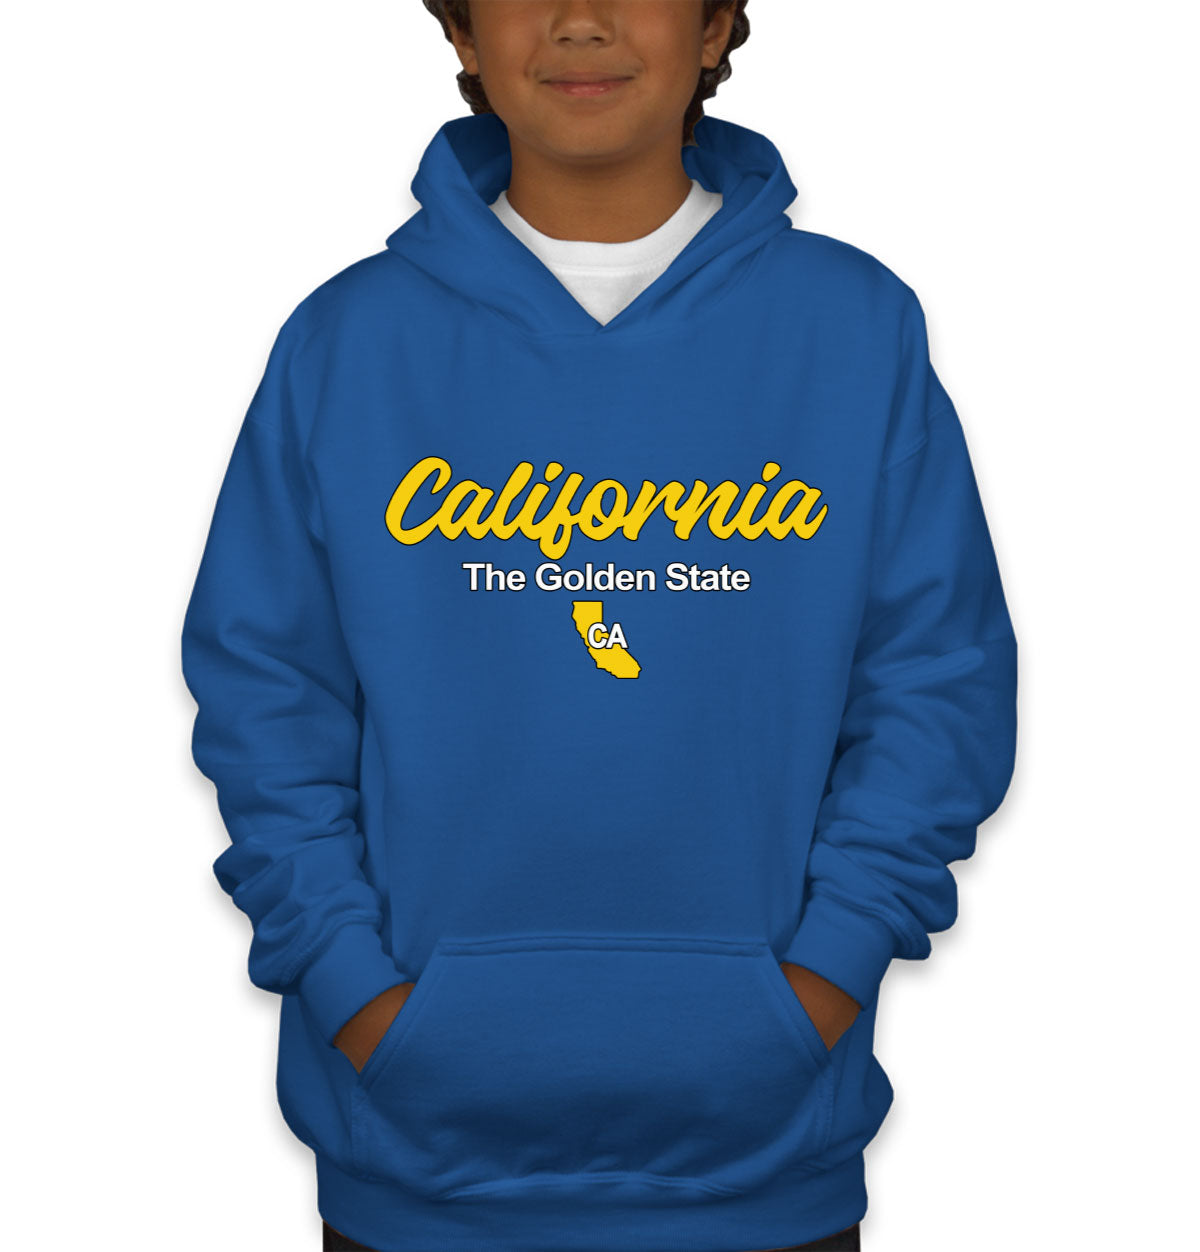 California The Golden State Youth Hoodie